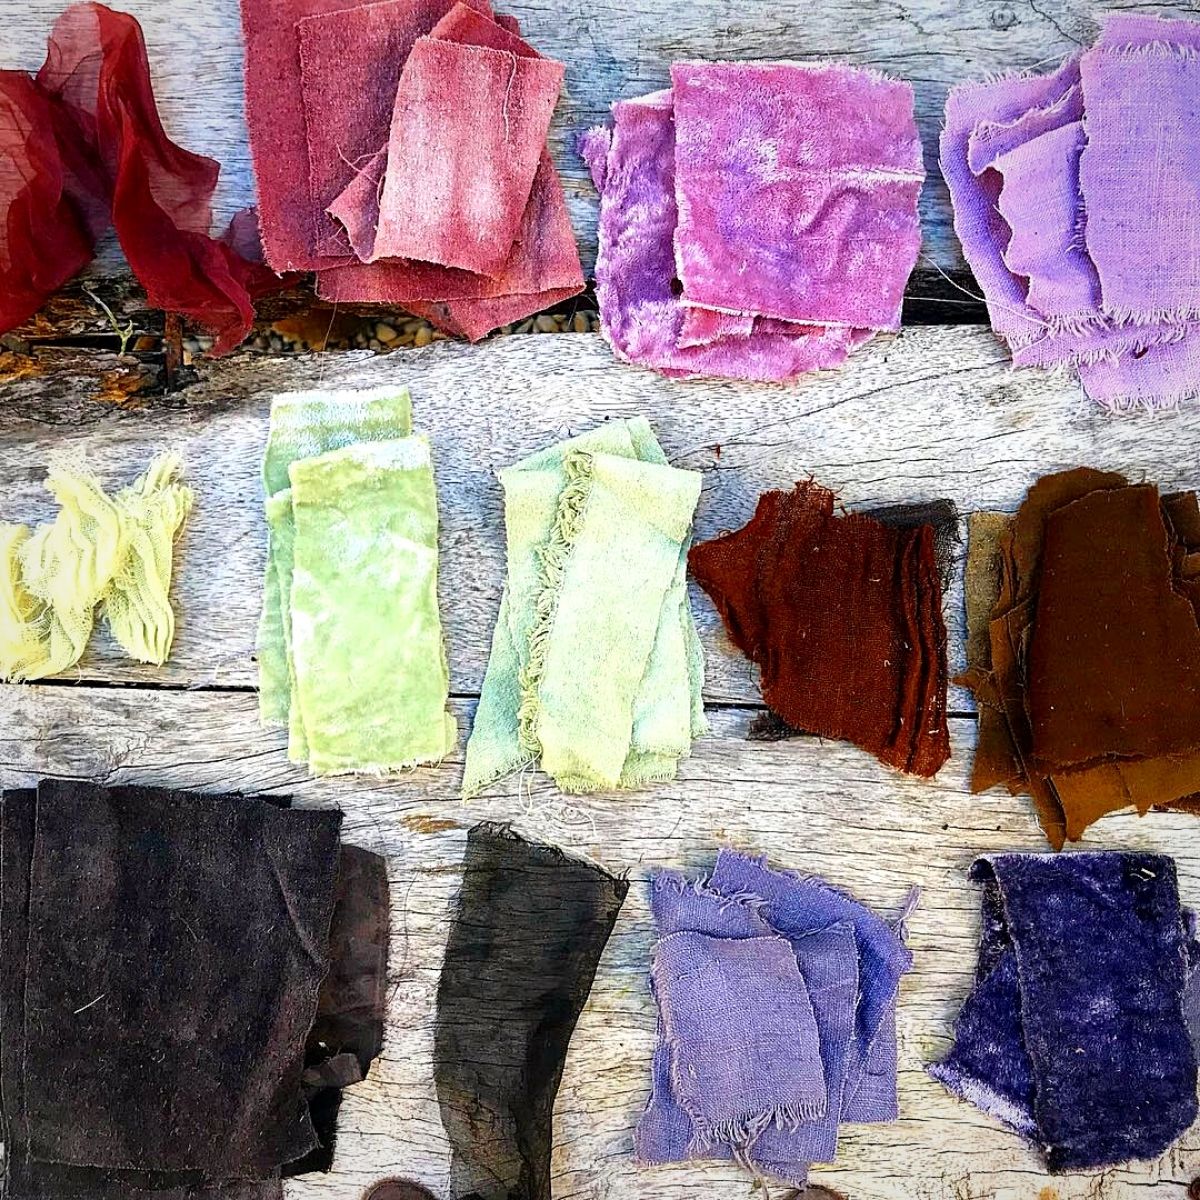 Sasha Duerr Brings Out the Rich Colors of Natural Sustainable Dyes